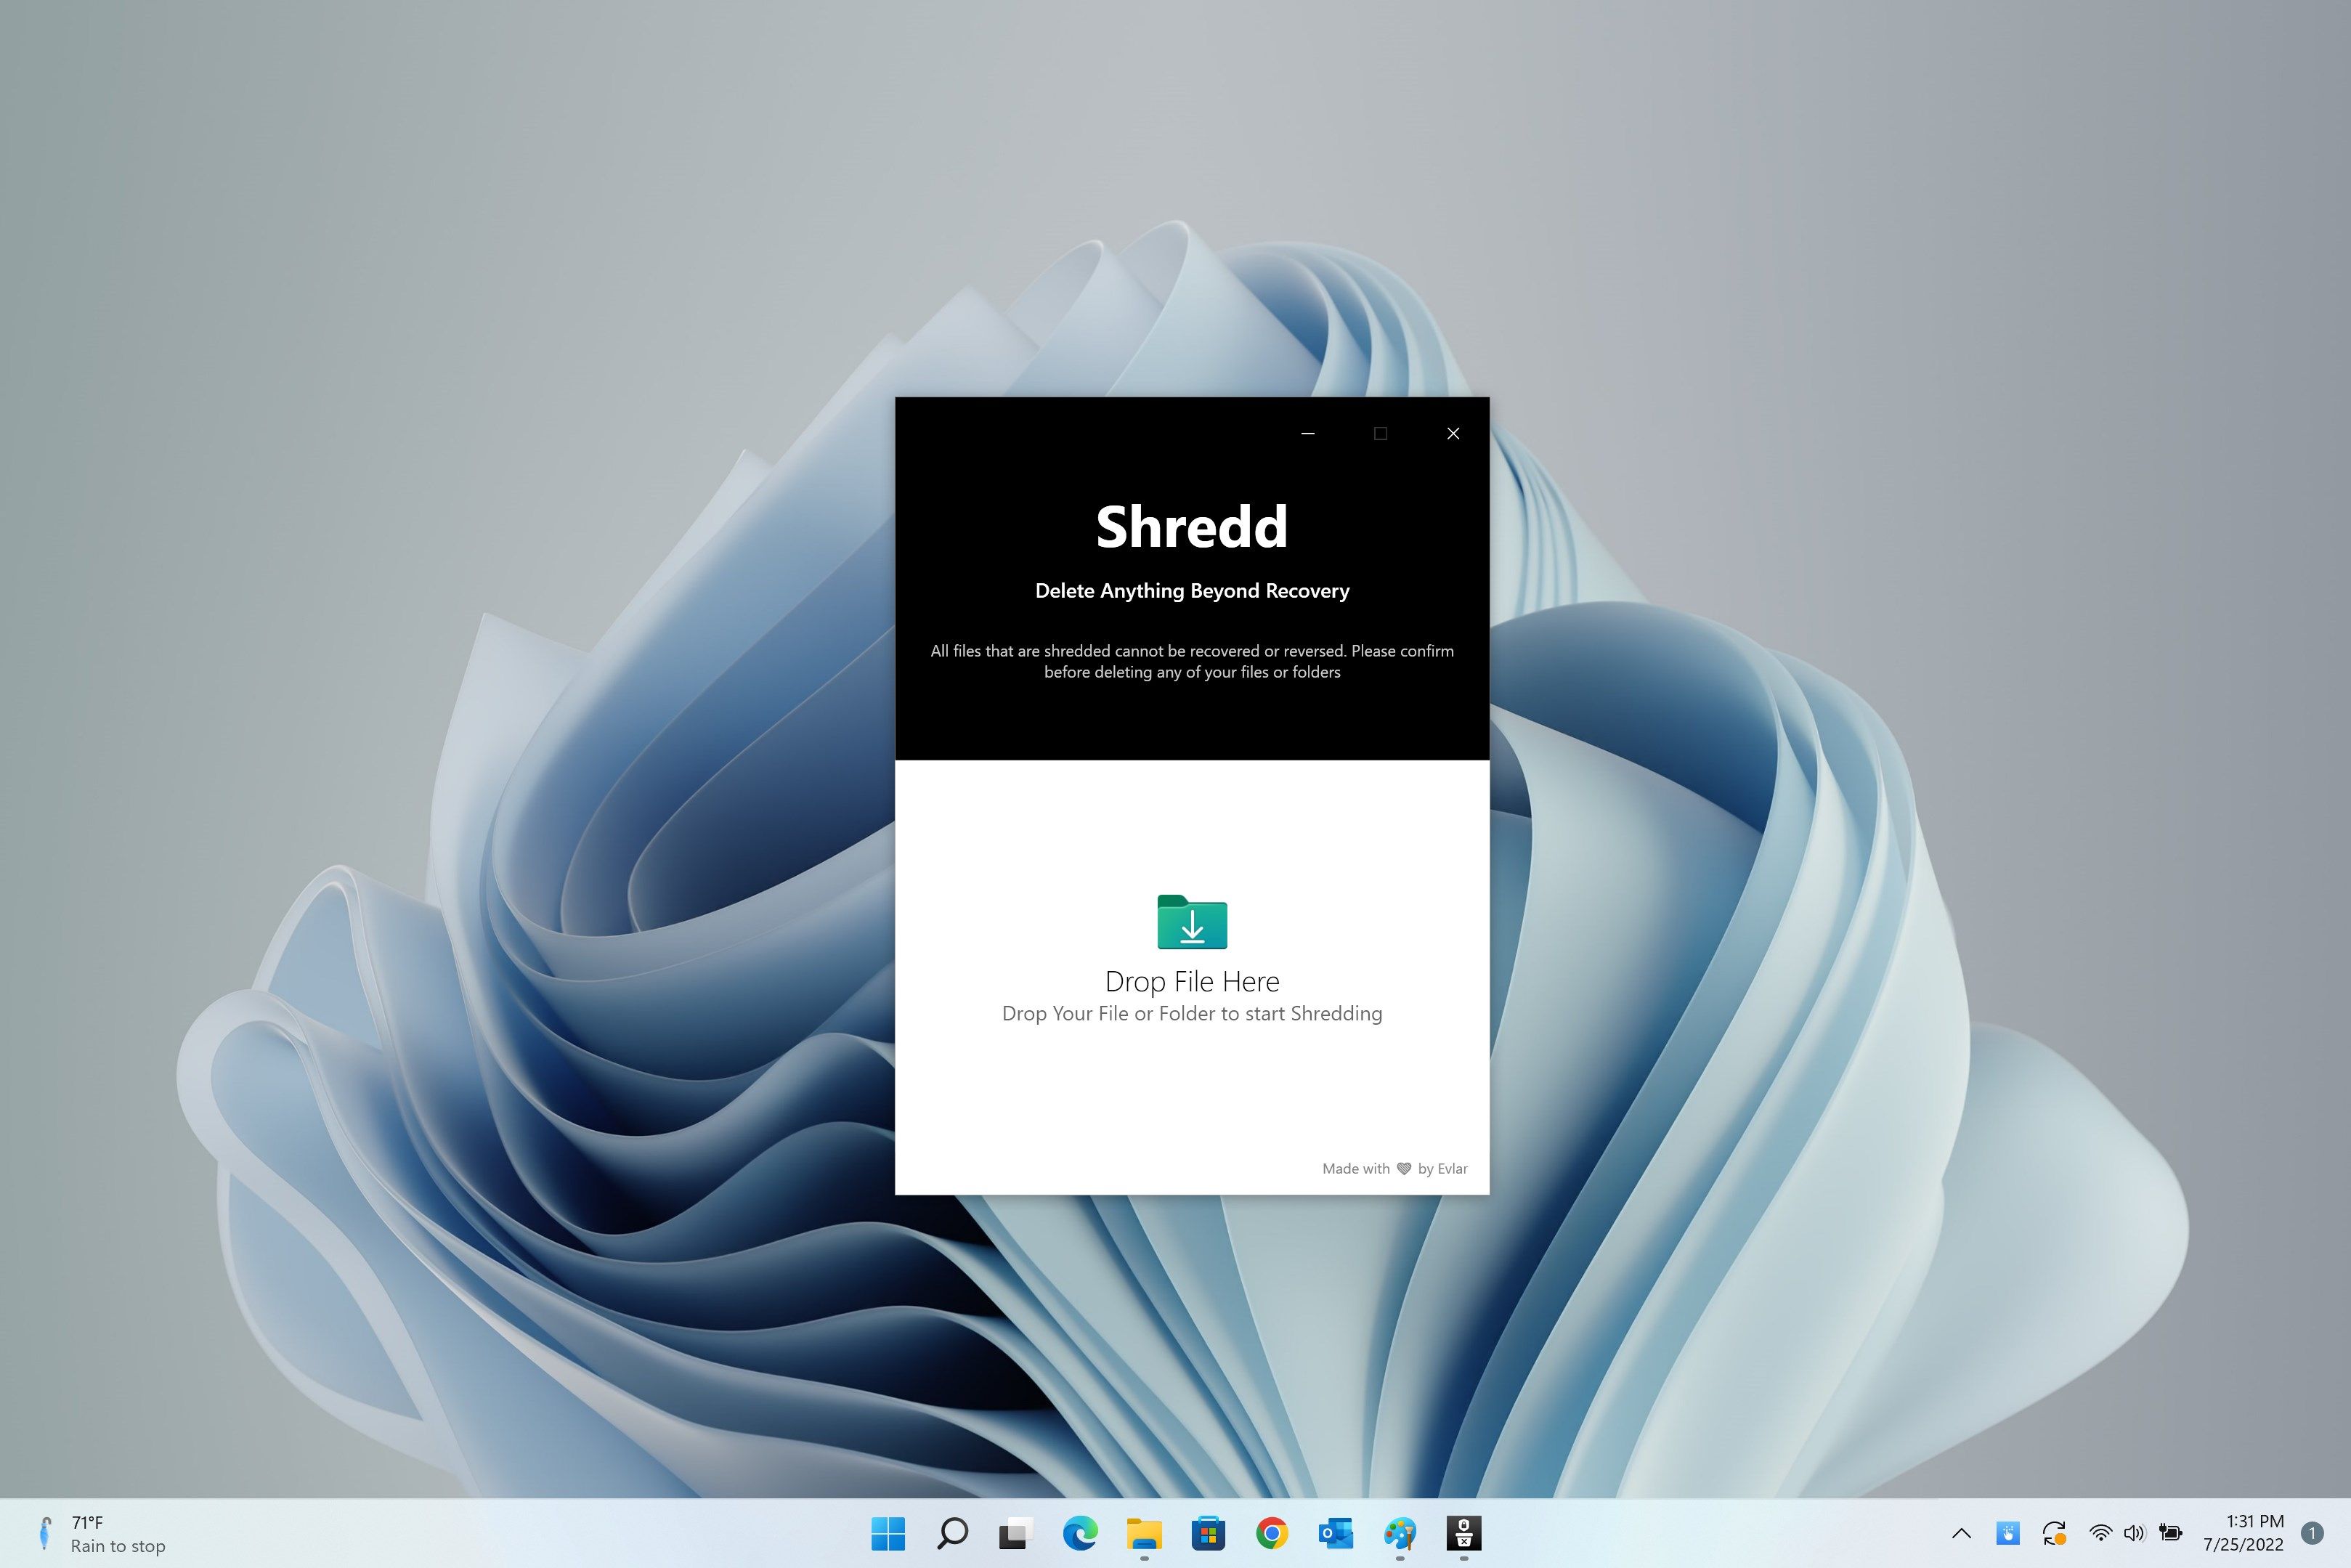 Drag and drop to shred your files